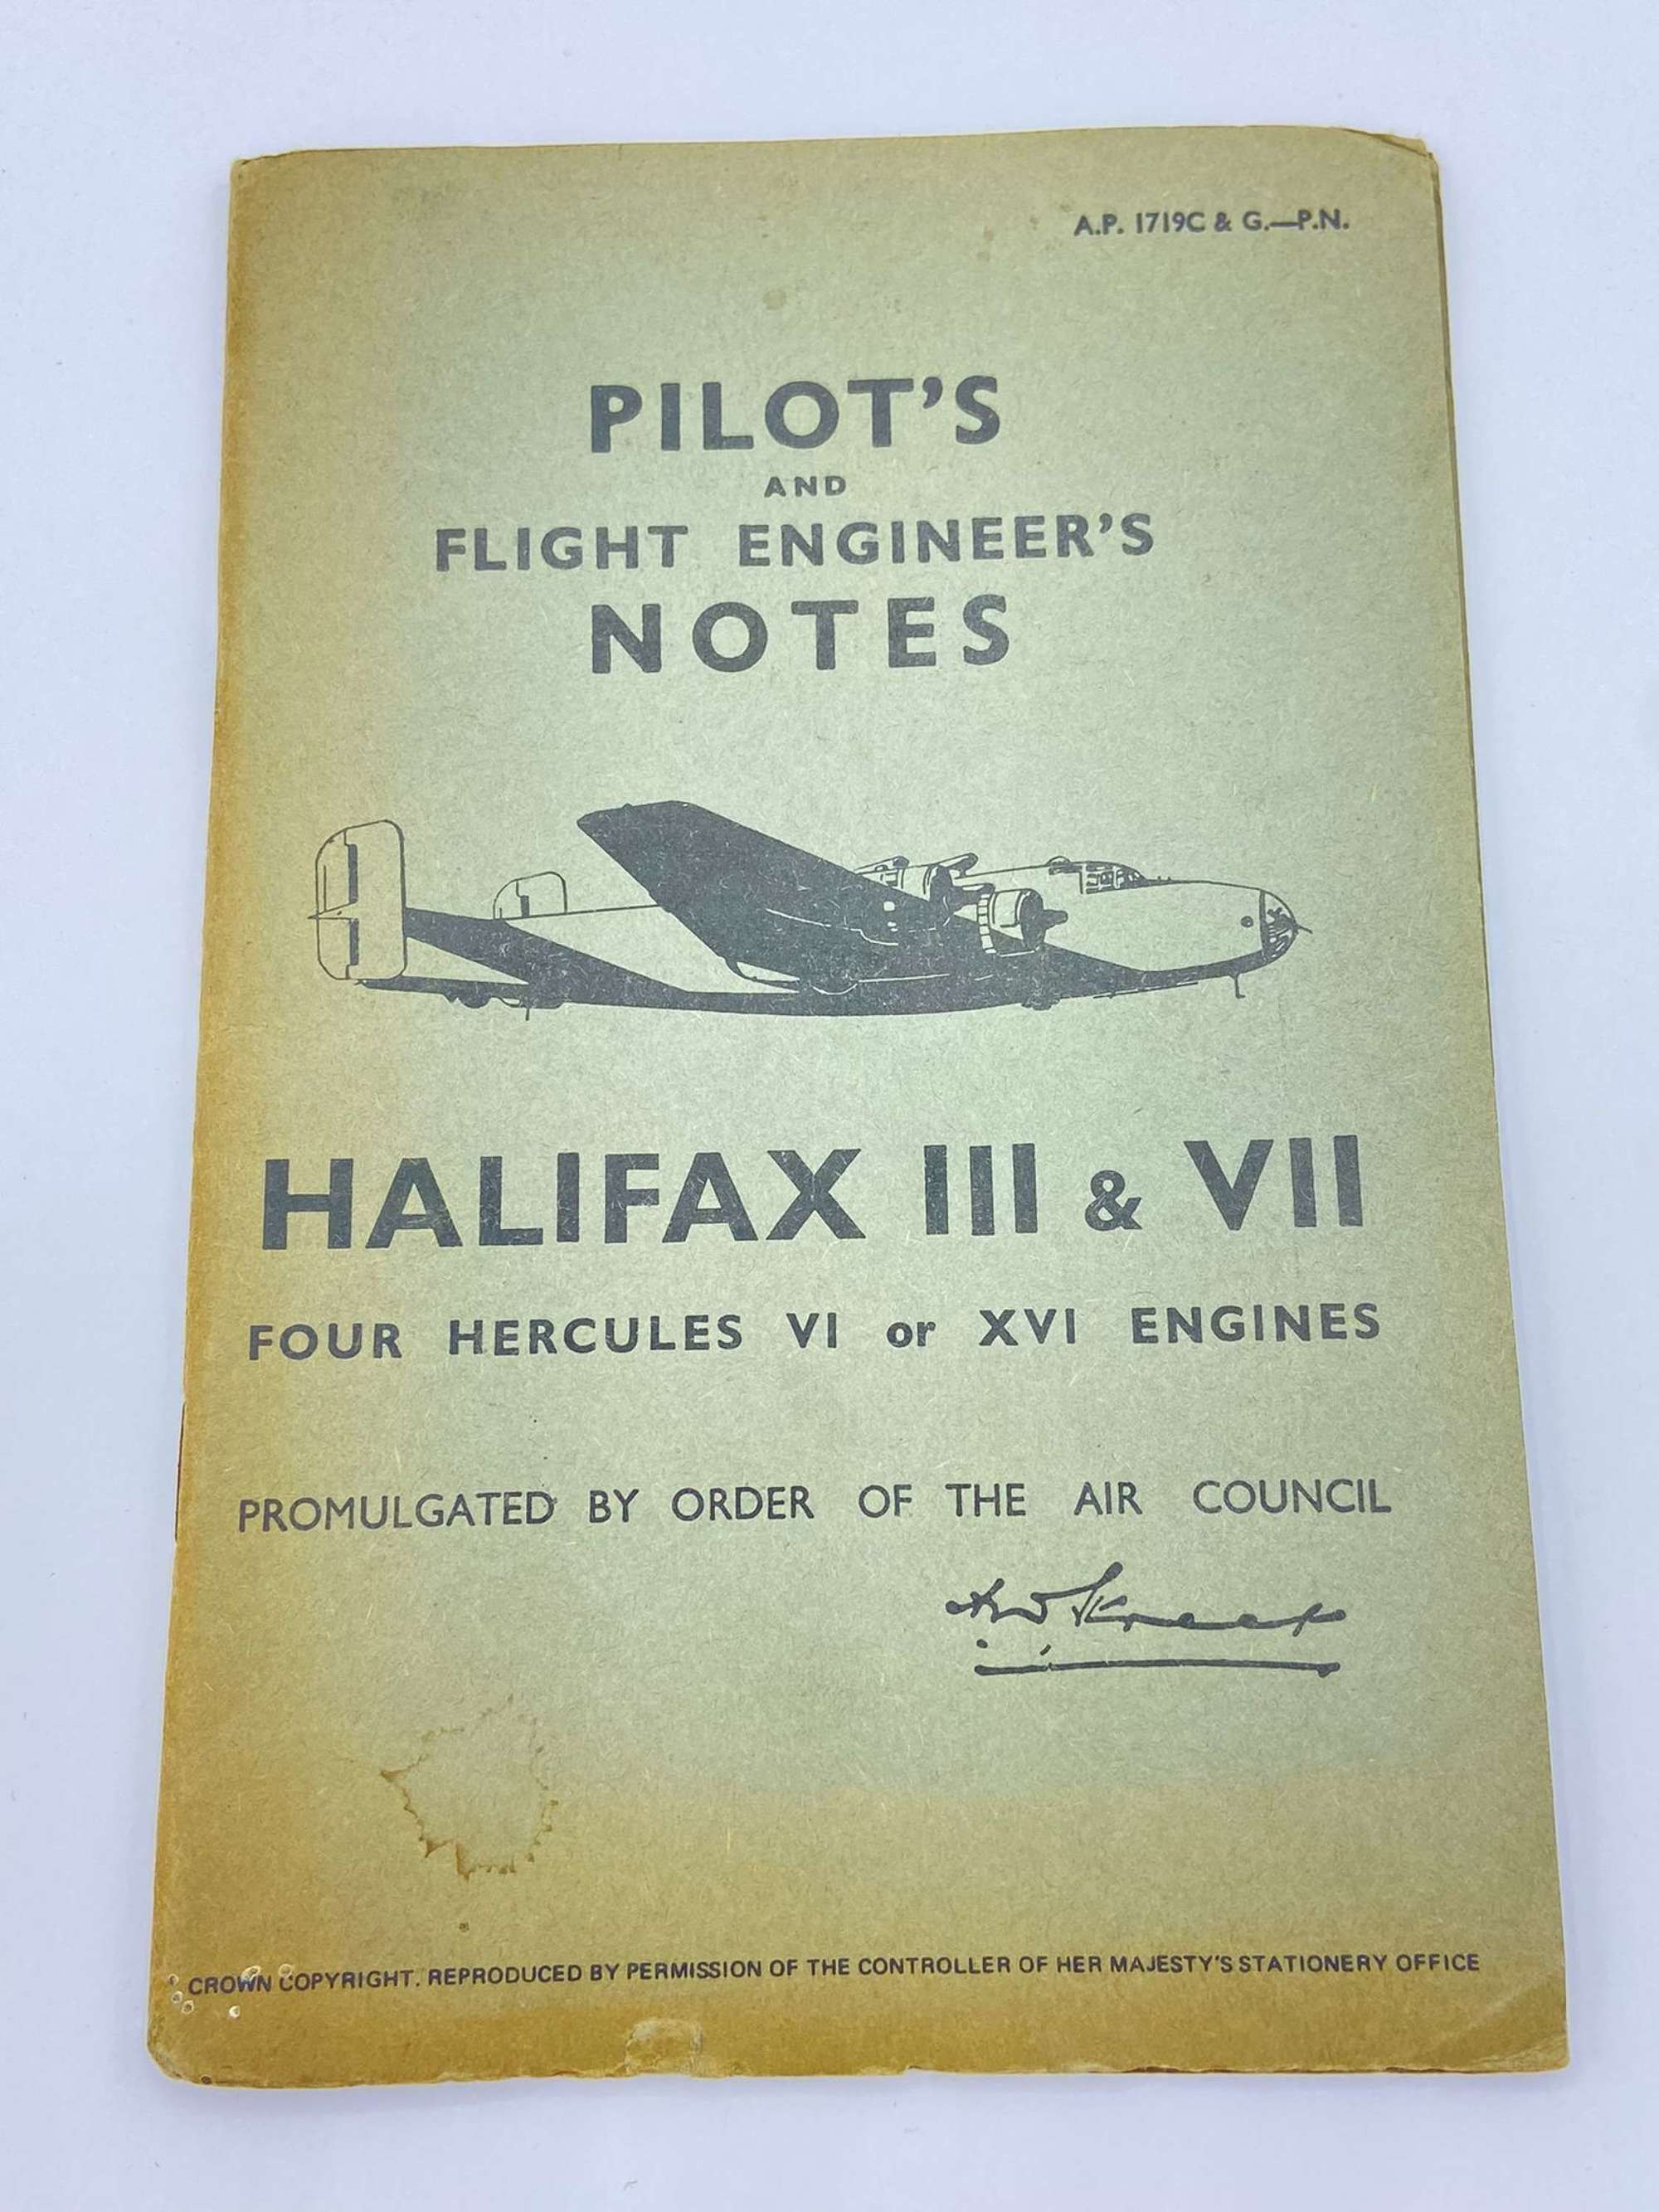 WW2 1944 Pilots Notes & Flight Engineers Notes On The Halifax III